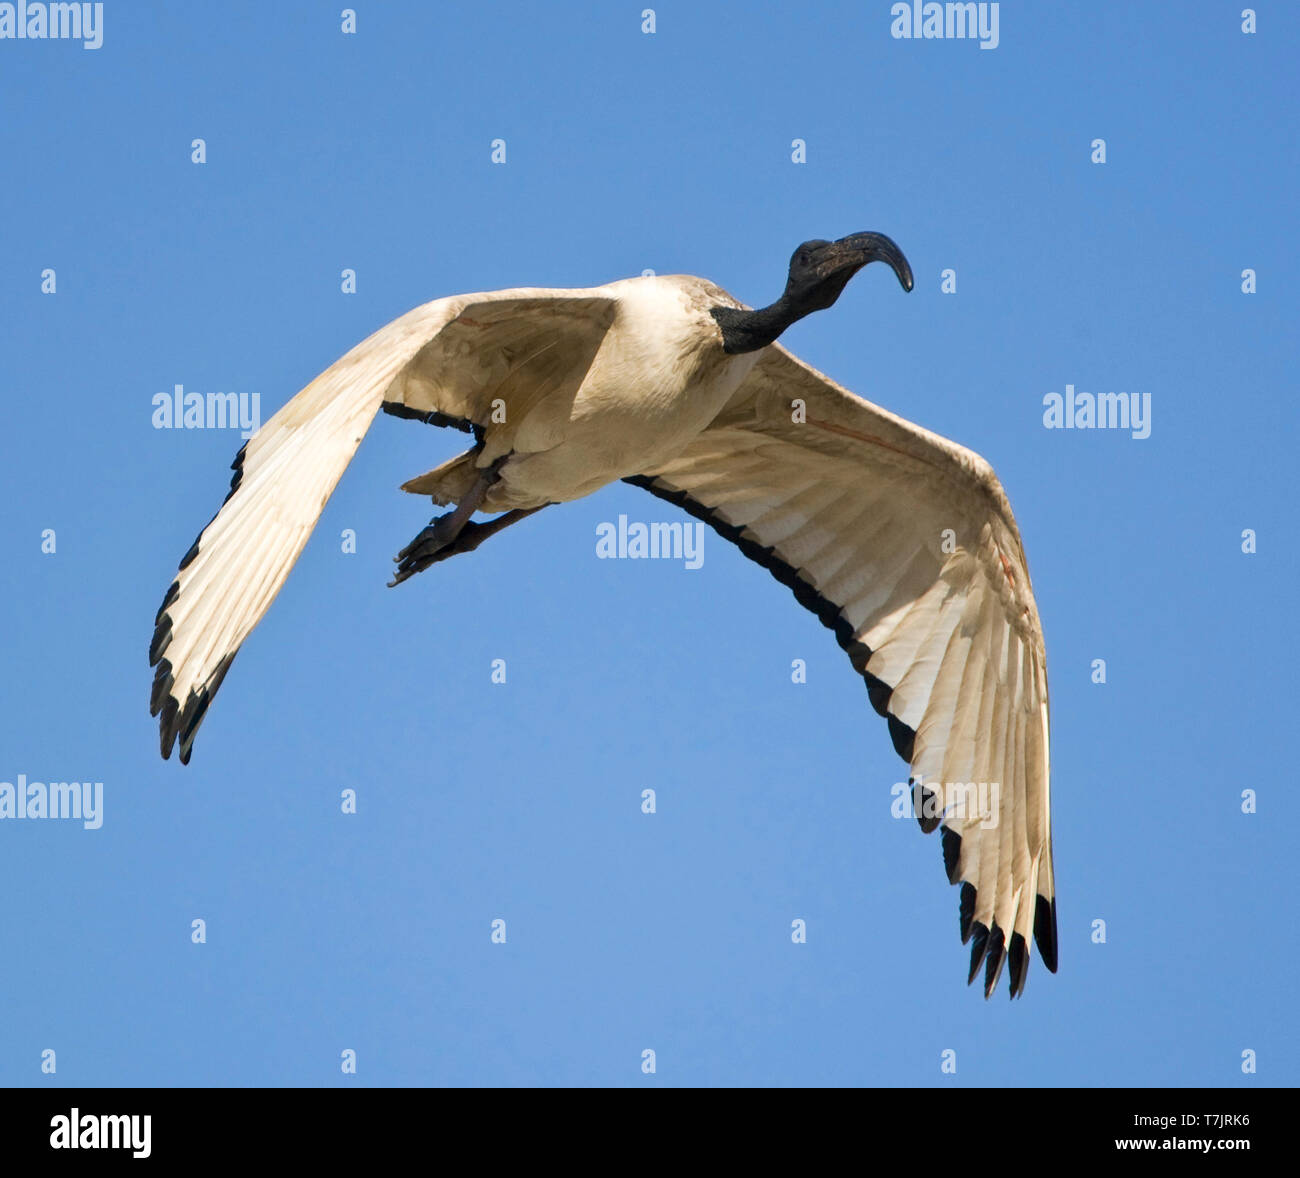 African Sacred Ibis (Threskiornis aethiopicus) in flight in South Africa, seen from the front. Flying against a blue sky as a background. Stock Photo